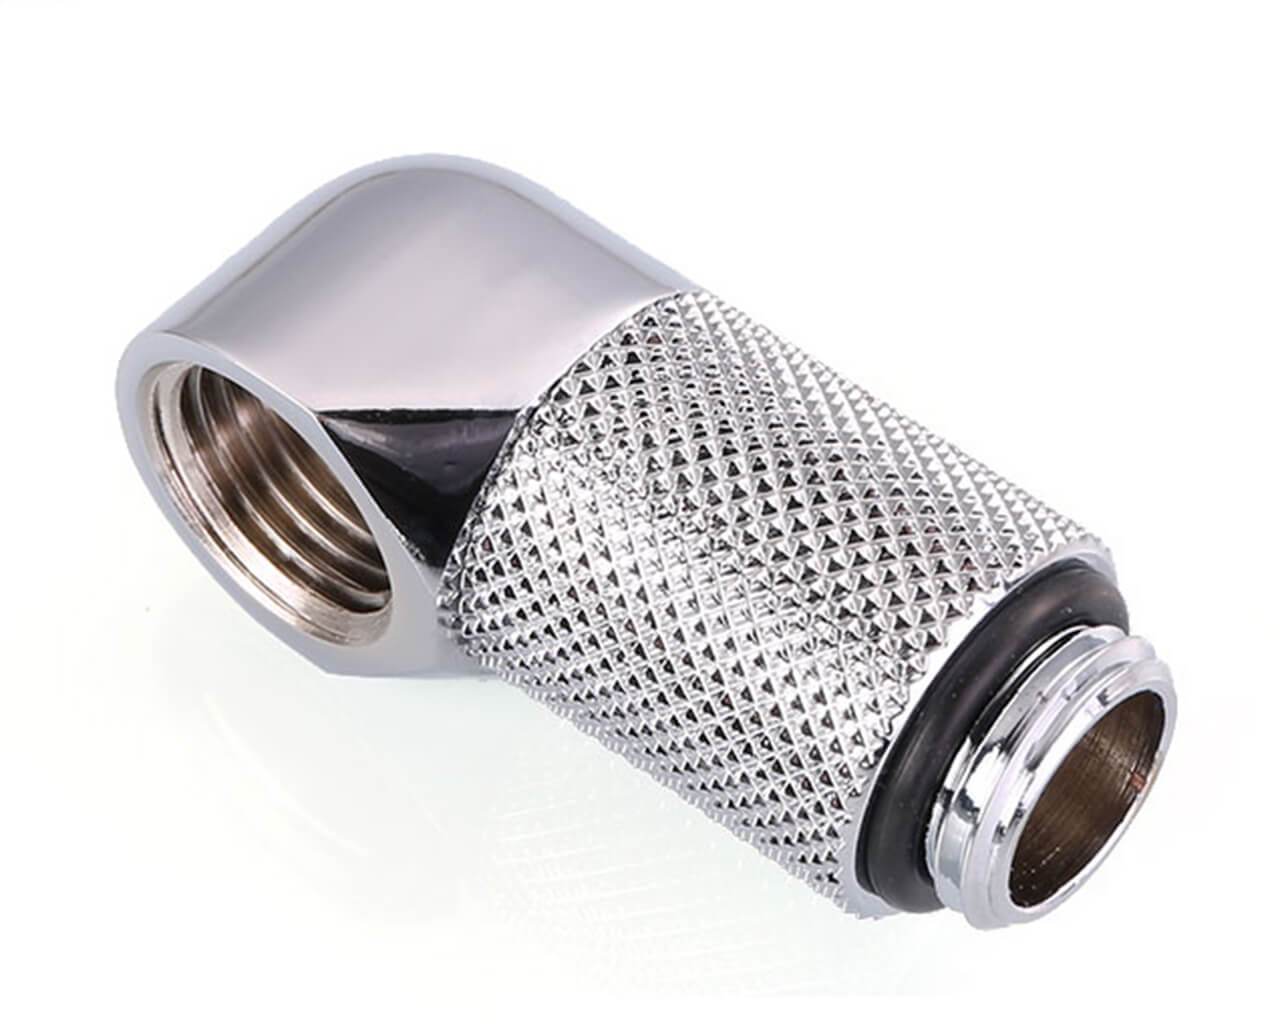 Bykski G 1/4in. Male to Female 90 Degree Rotary 20mm Extension Elbow Fitting (B-RD90-EXJ20) - PrimoChill - KEEPING IT COOL Silver